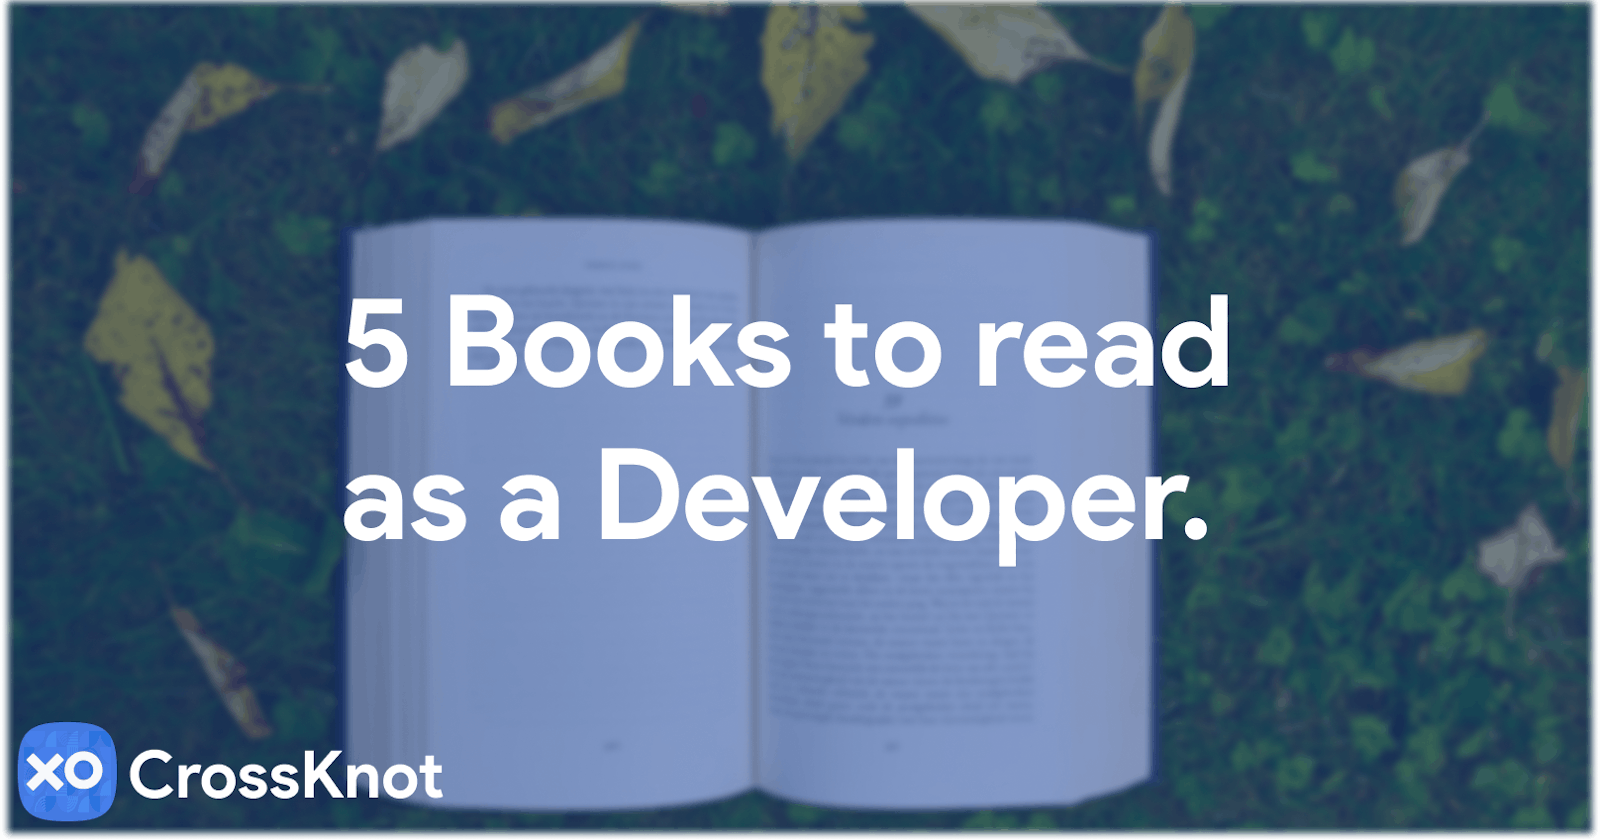 5 Books to read as a developer.